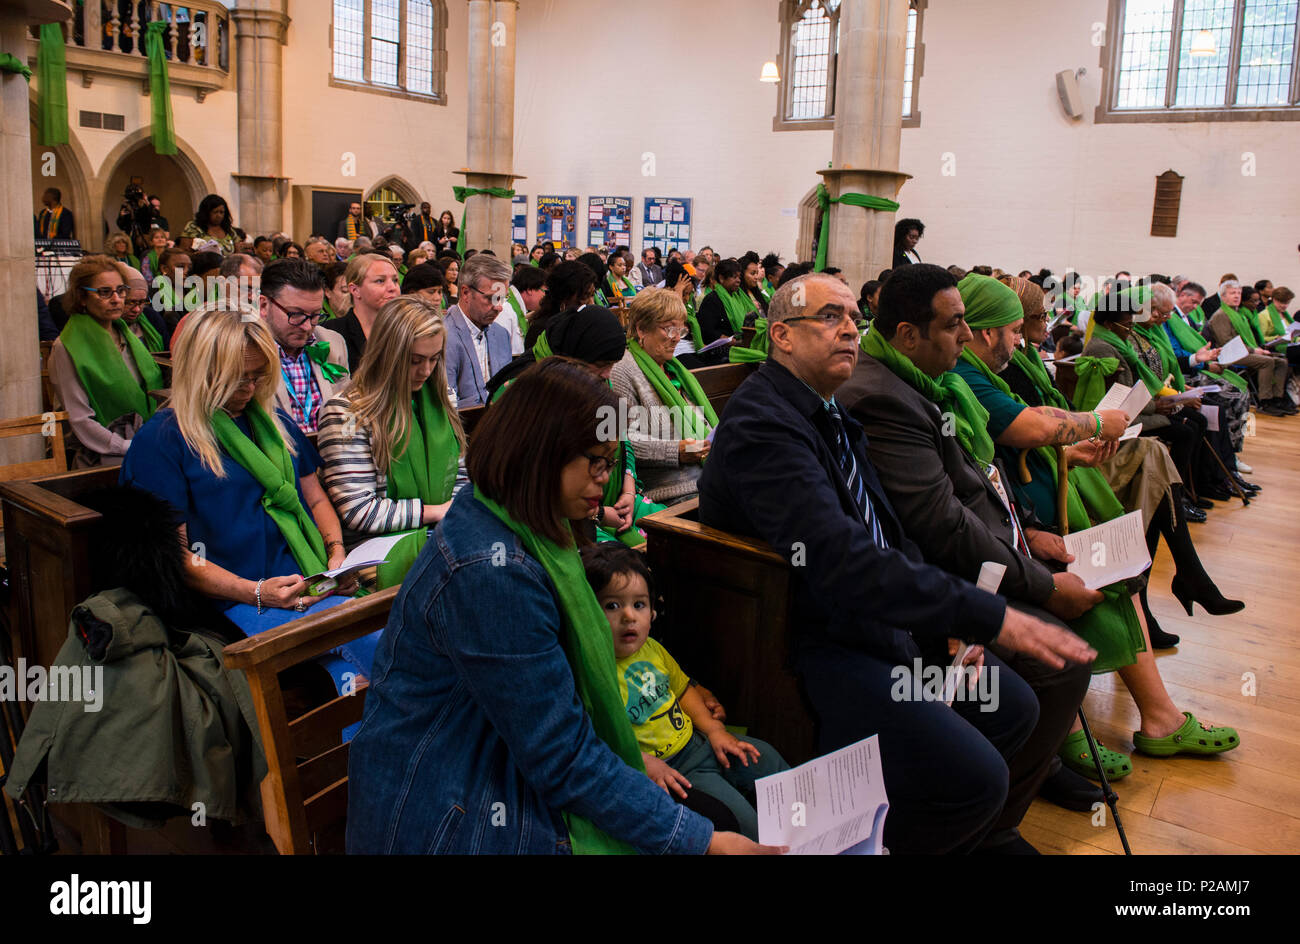 The congregation all wearing green scarves while attending the service to mark the Grenfell Fire anniversary in St Helen's Church, North Kensington, London, England, UK, 14th June, 2018 Stock Photo